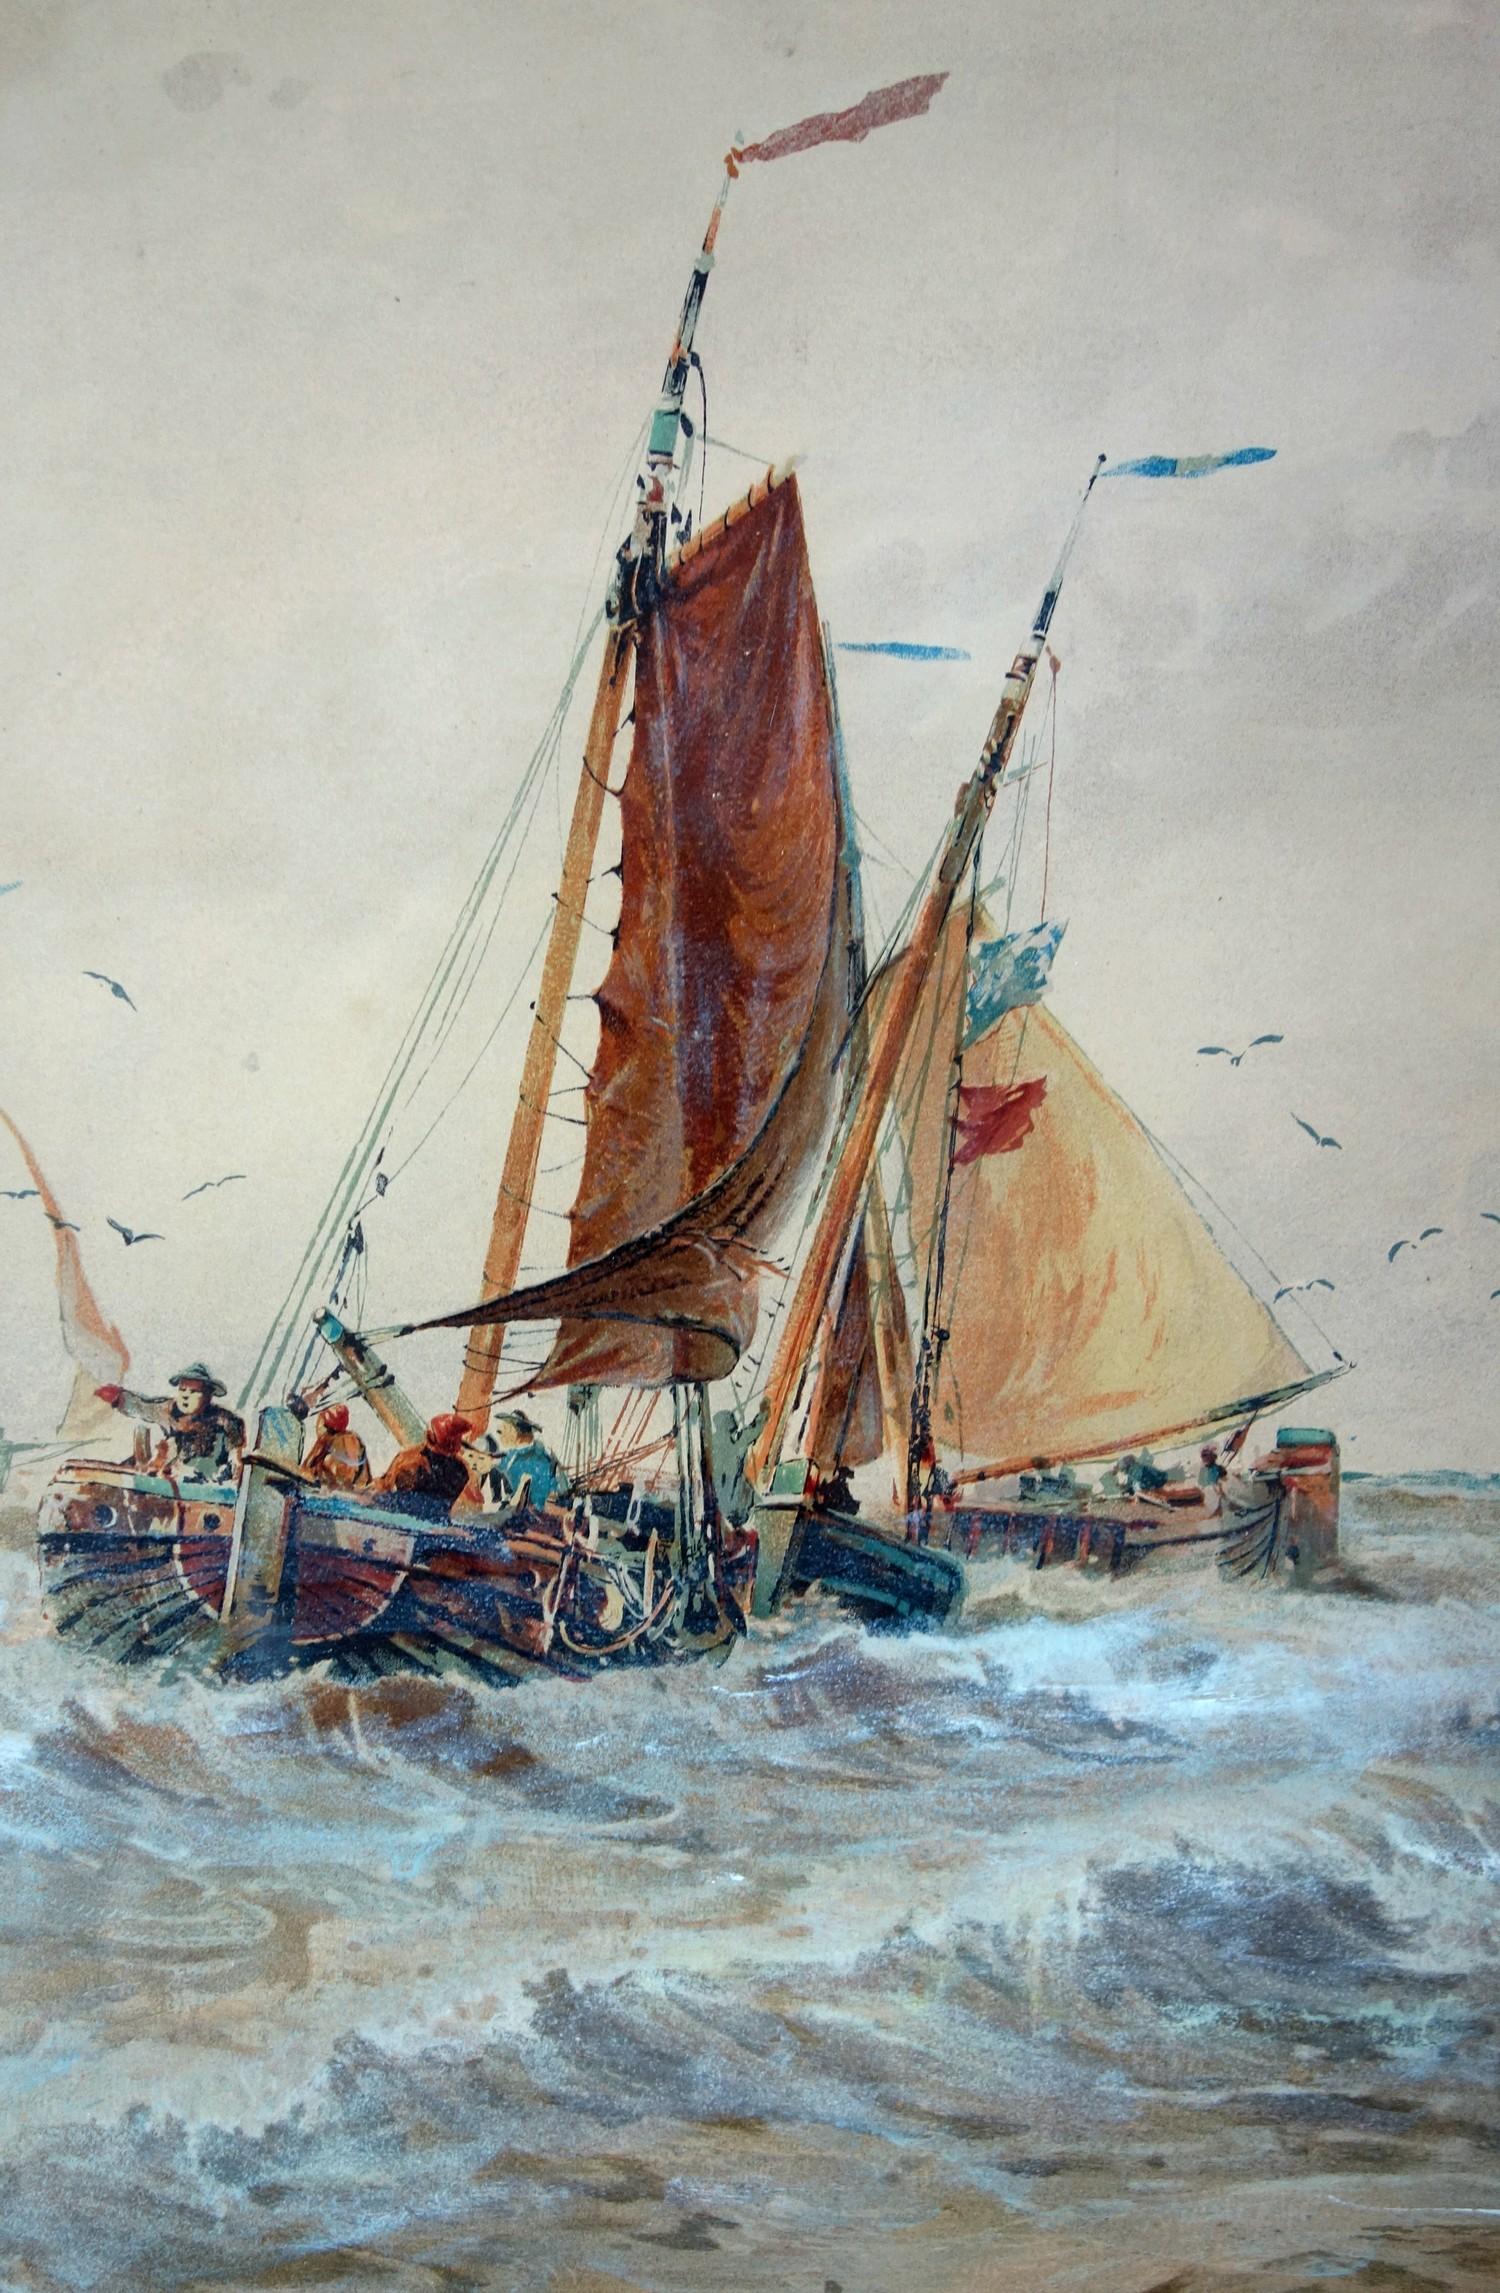 AFTER T. B. HARDY, FISHING SMACKS IN A CHOPPY SEA, WATERCOLOUR, 33 X 50.7 CM - Image 3 of 3